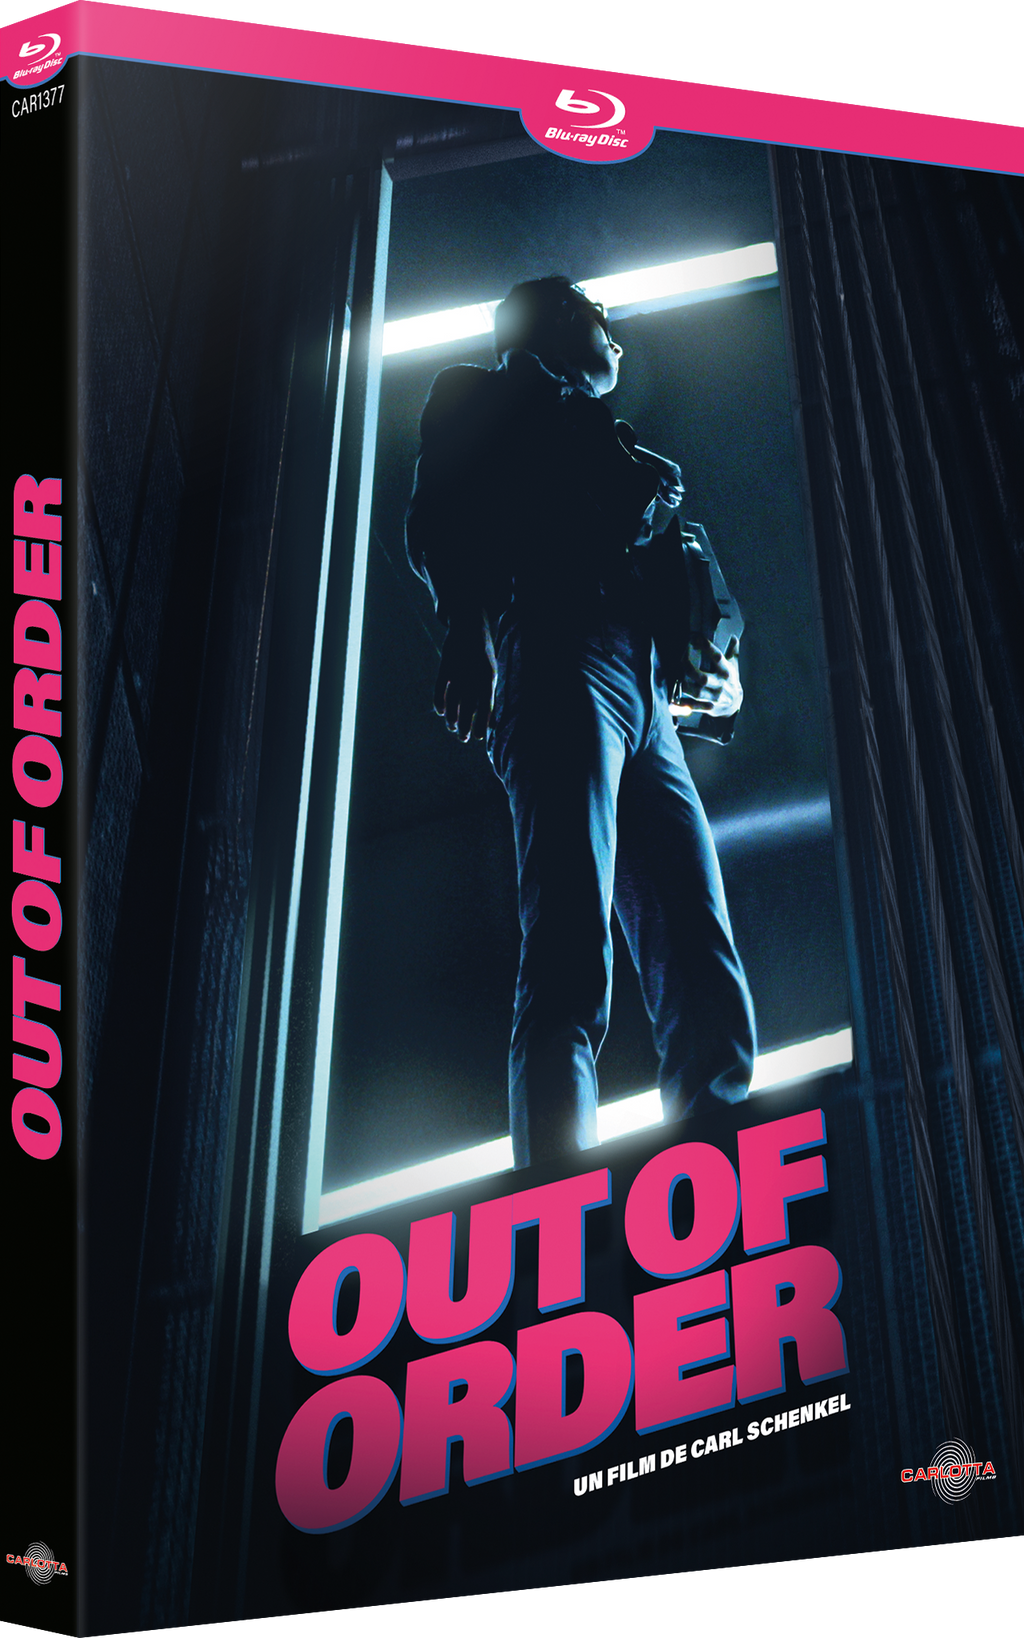 Out of order by Carl Schenkel